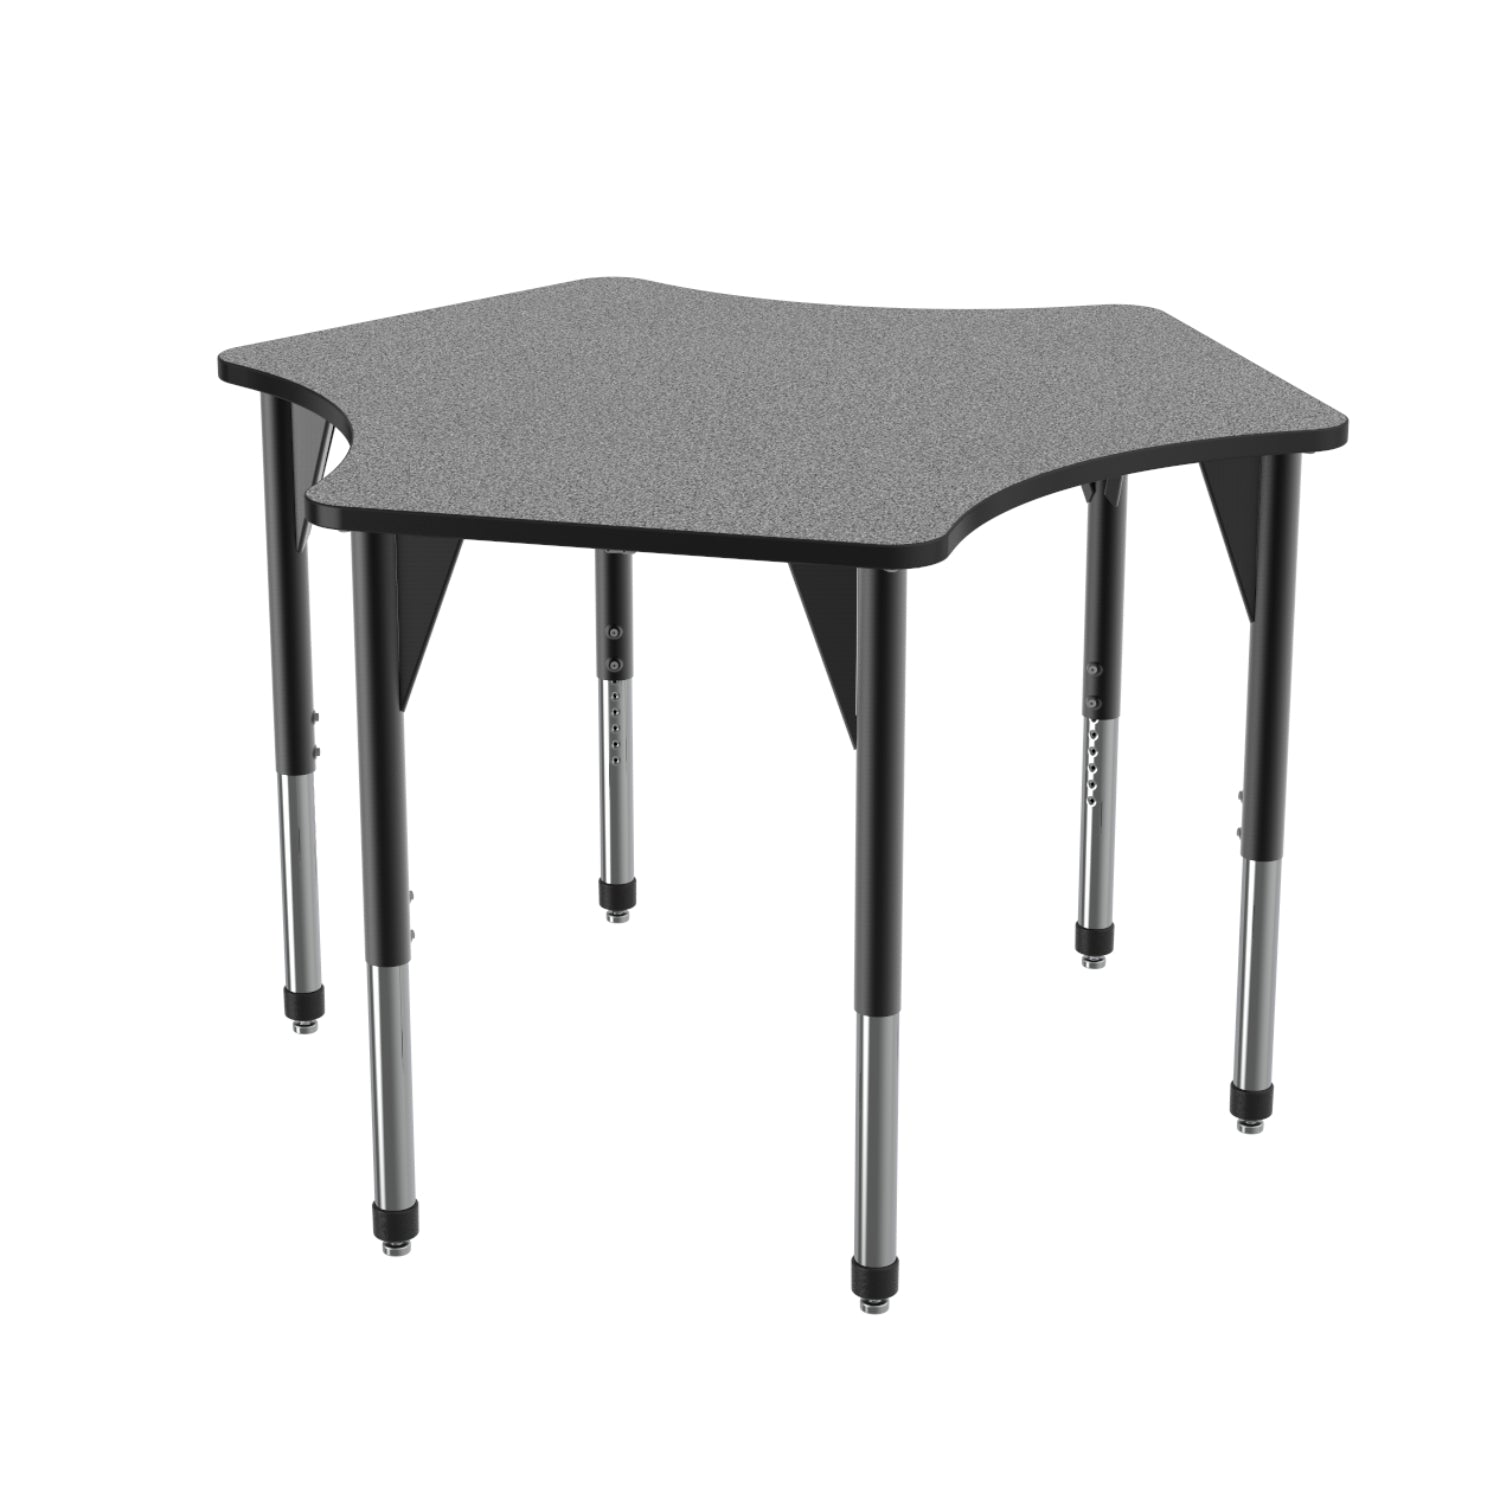 Premier Standing Height Collaborative Classroom Table, 60" Delta